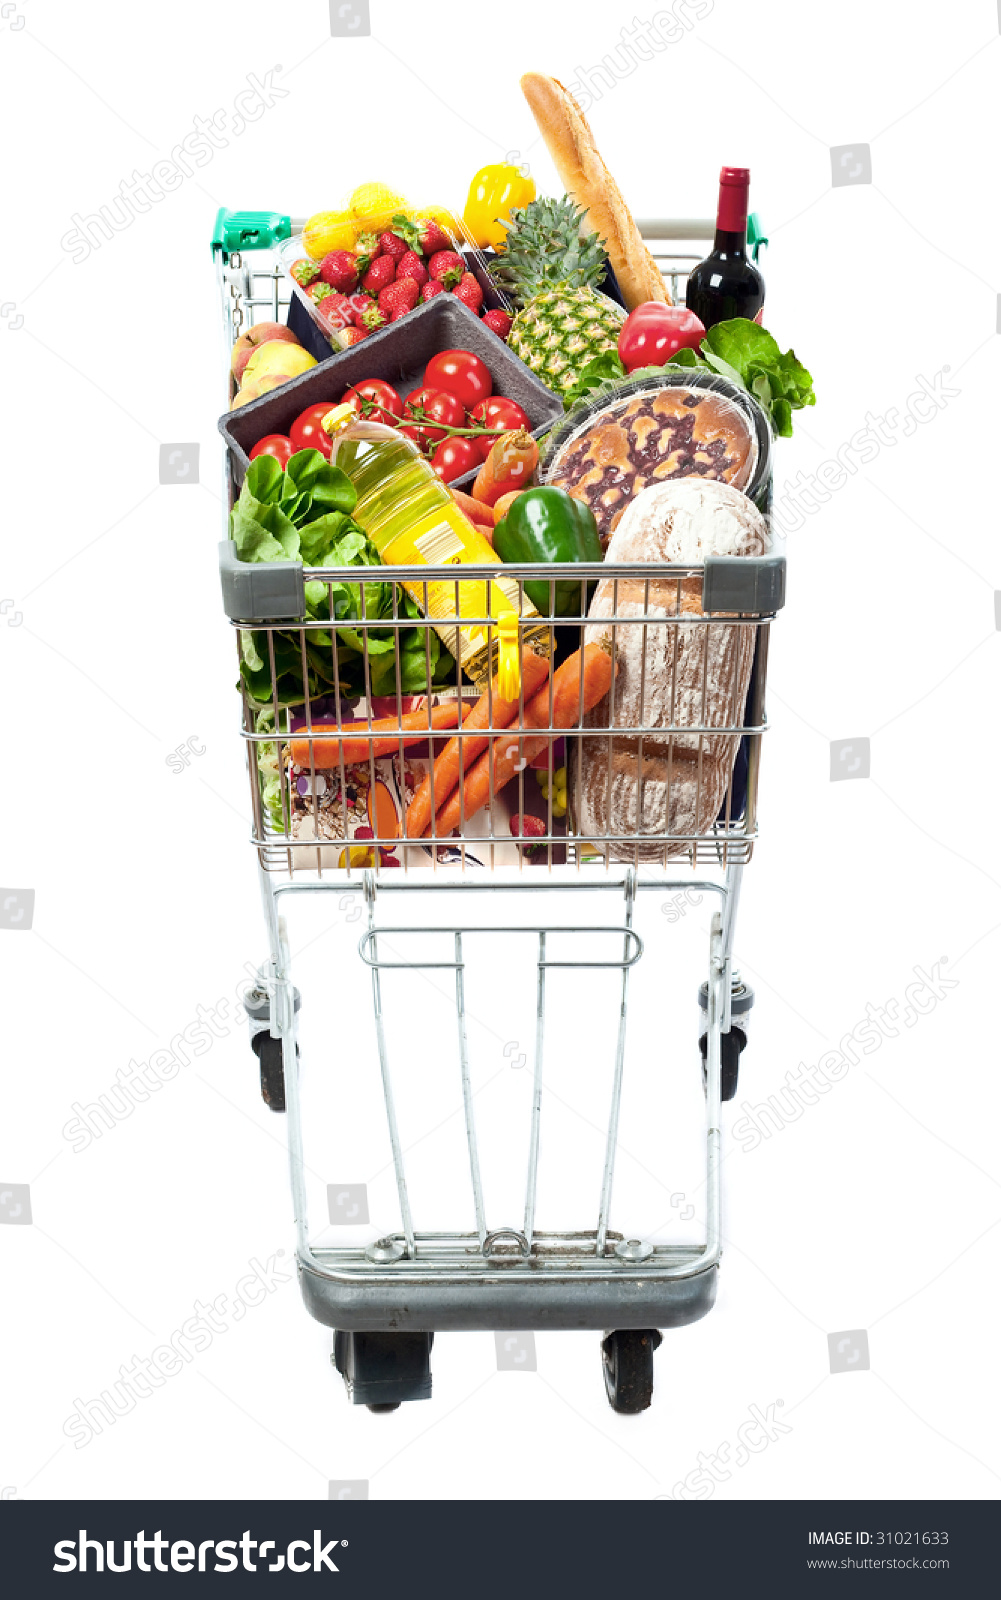 A frontal view of a shopping trolley filled with a selection of fresh food #31021633